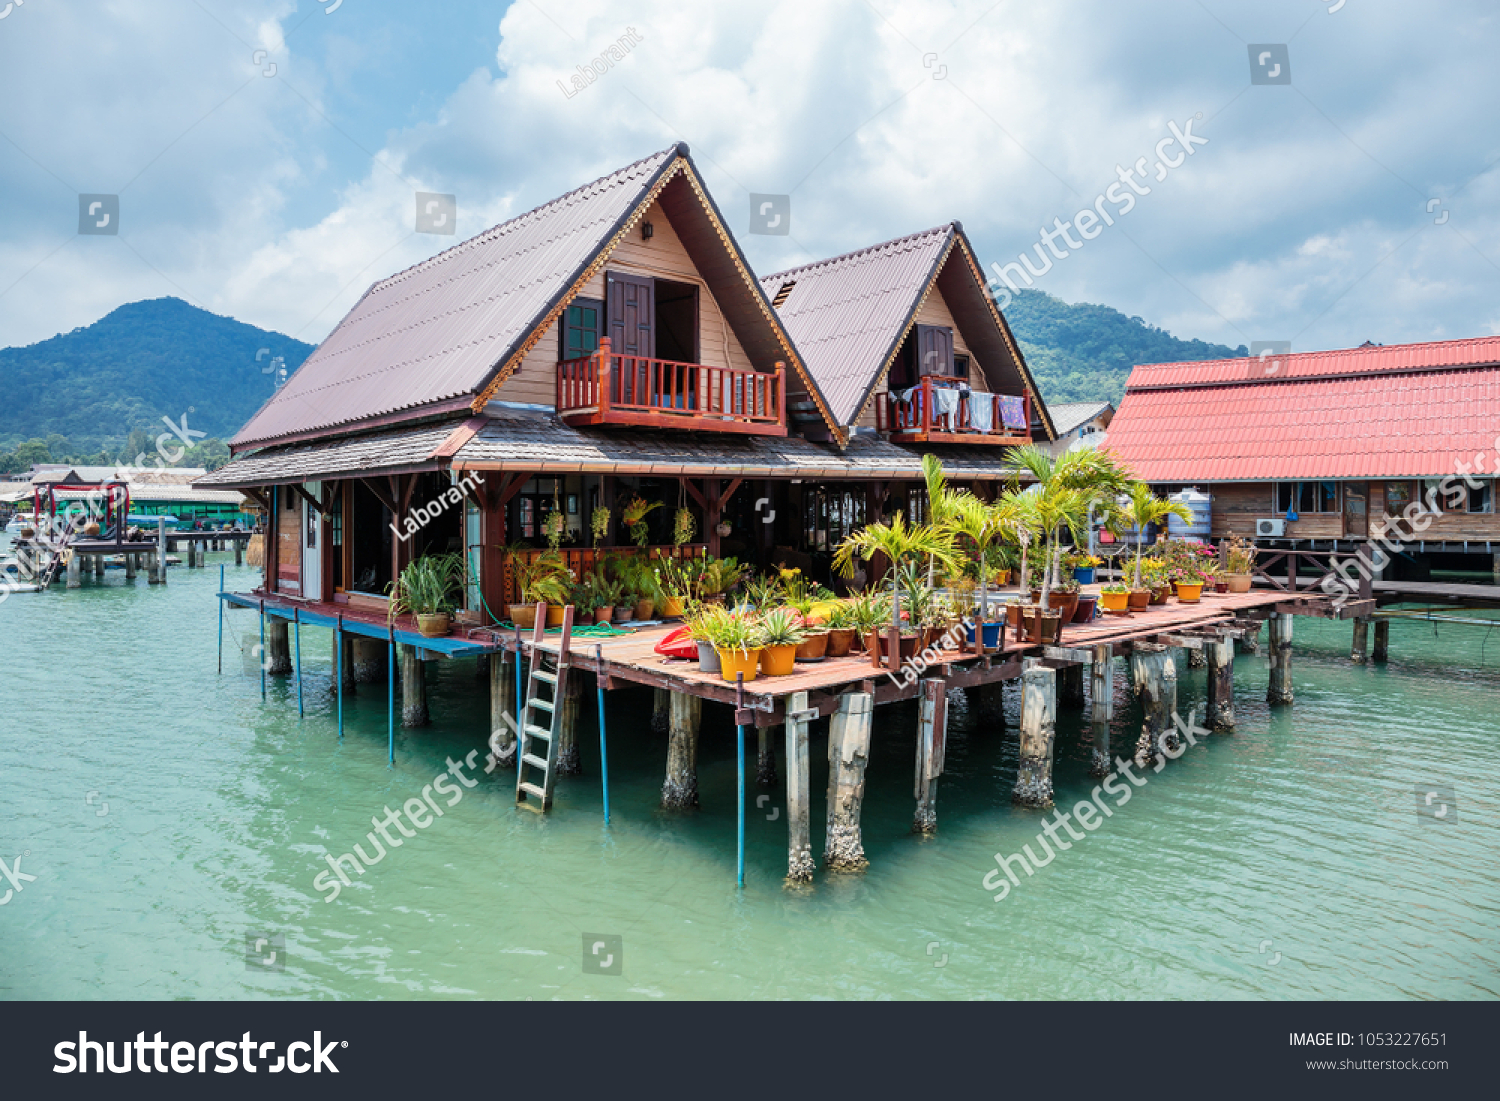 Houses on stilts in the fishing village of Bang Bao, Koh Chang, Thailand #1053227651